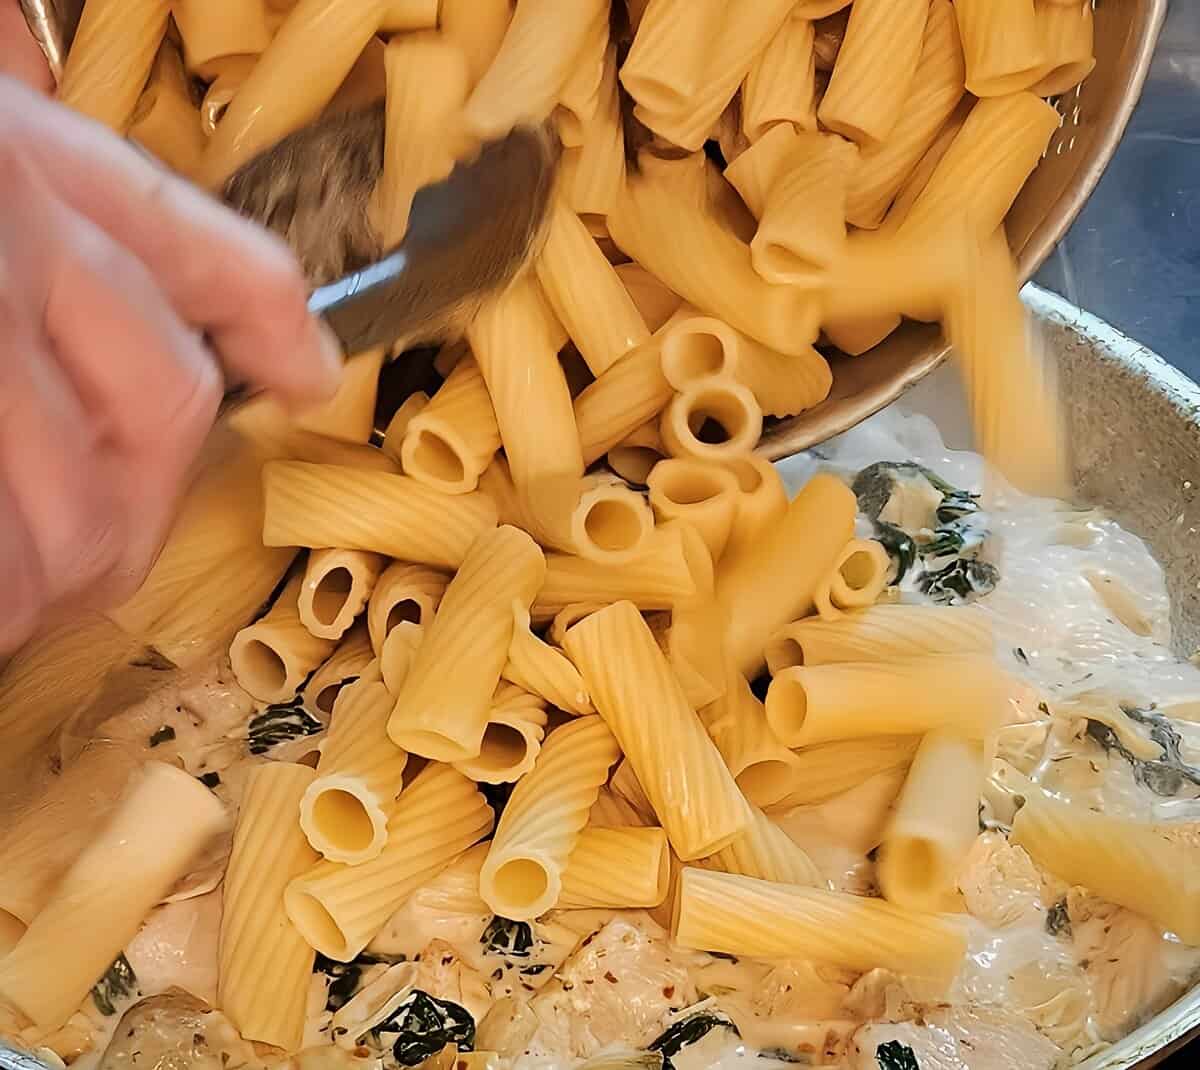 cooked rigatoni pasta being poured into a skillet containing chicken, spinach, and artichokes cooking in a cream sauce.